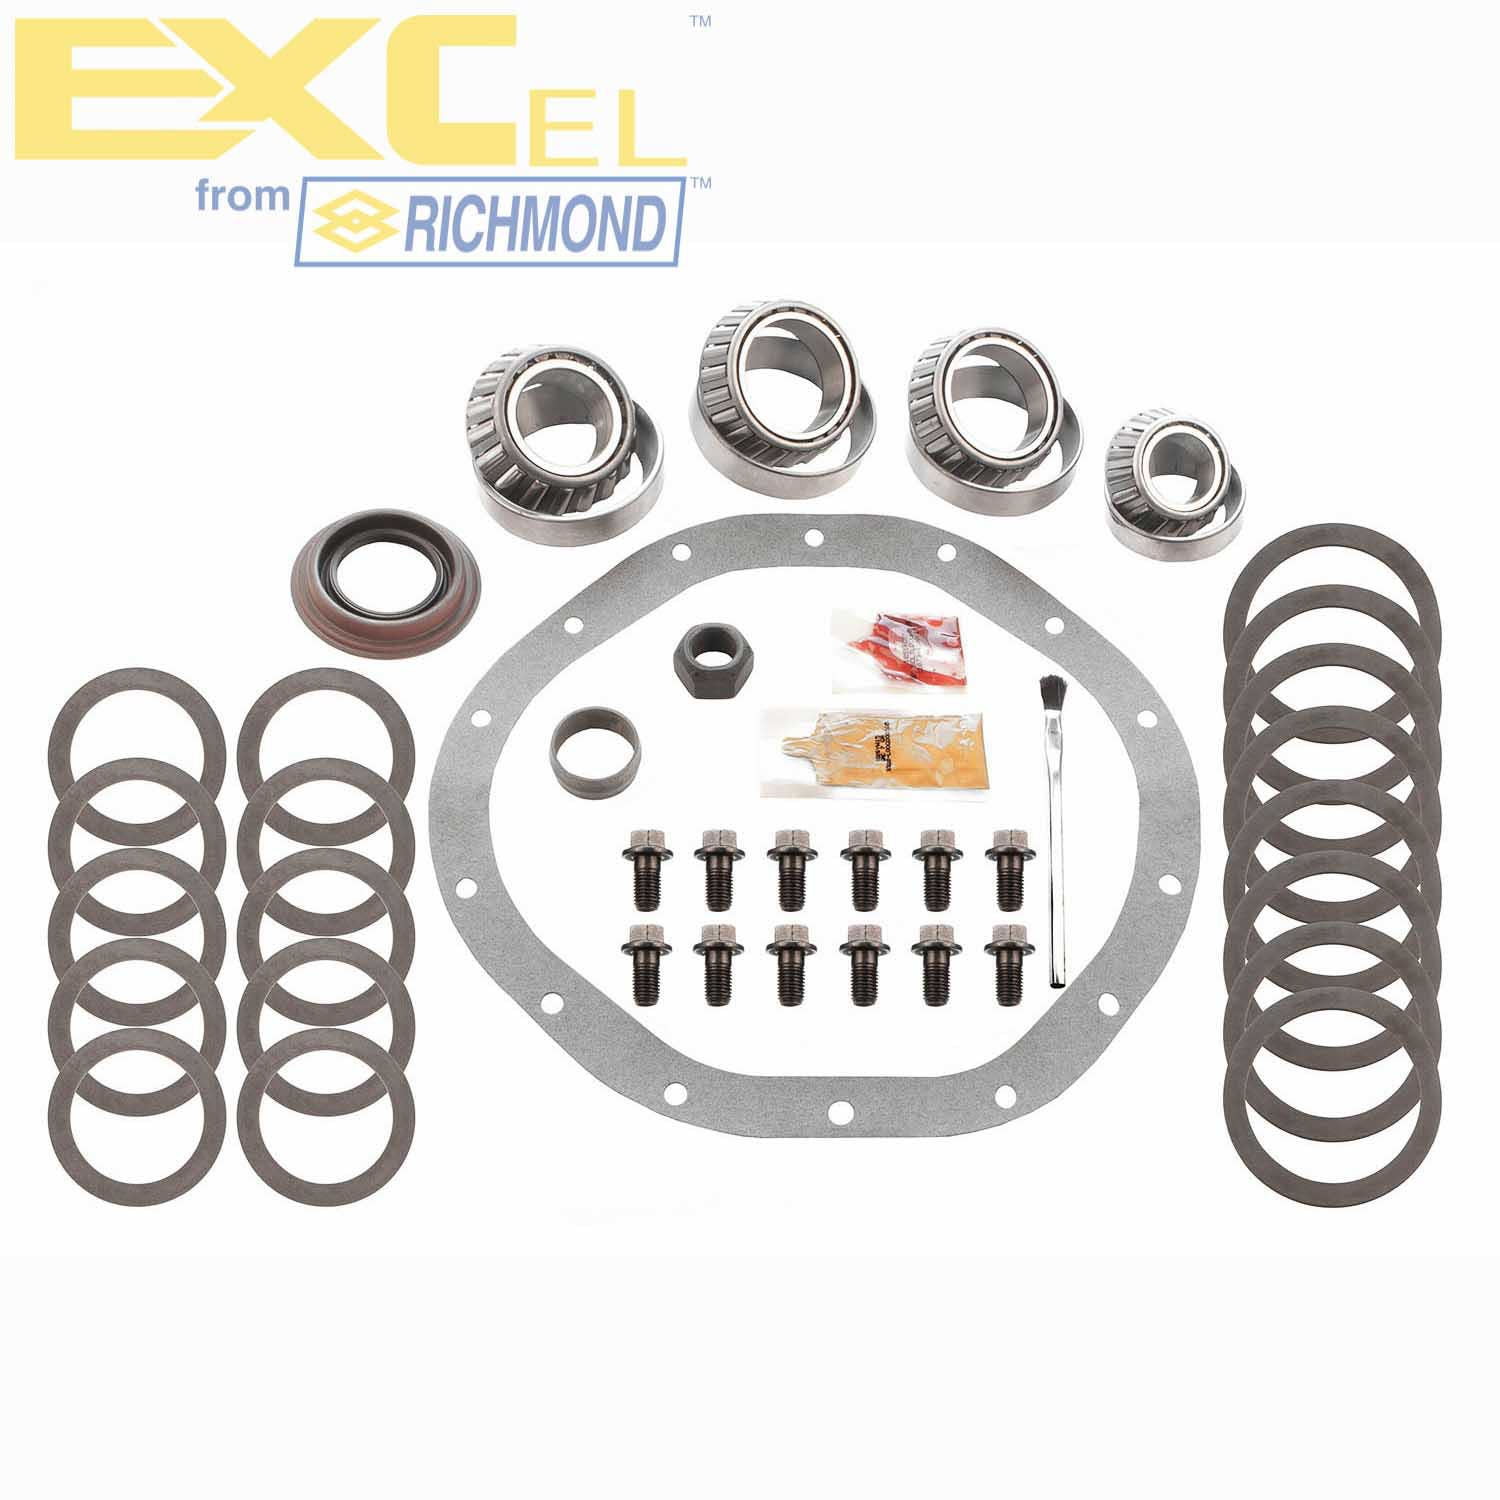 Excel XL-1066-1 Differential Bearing Kit